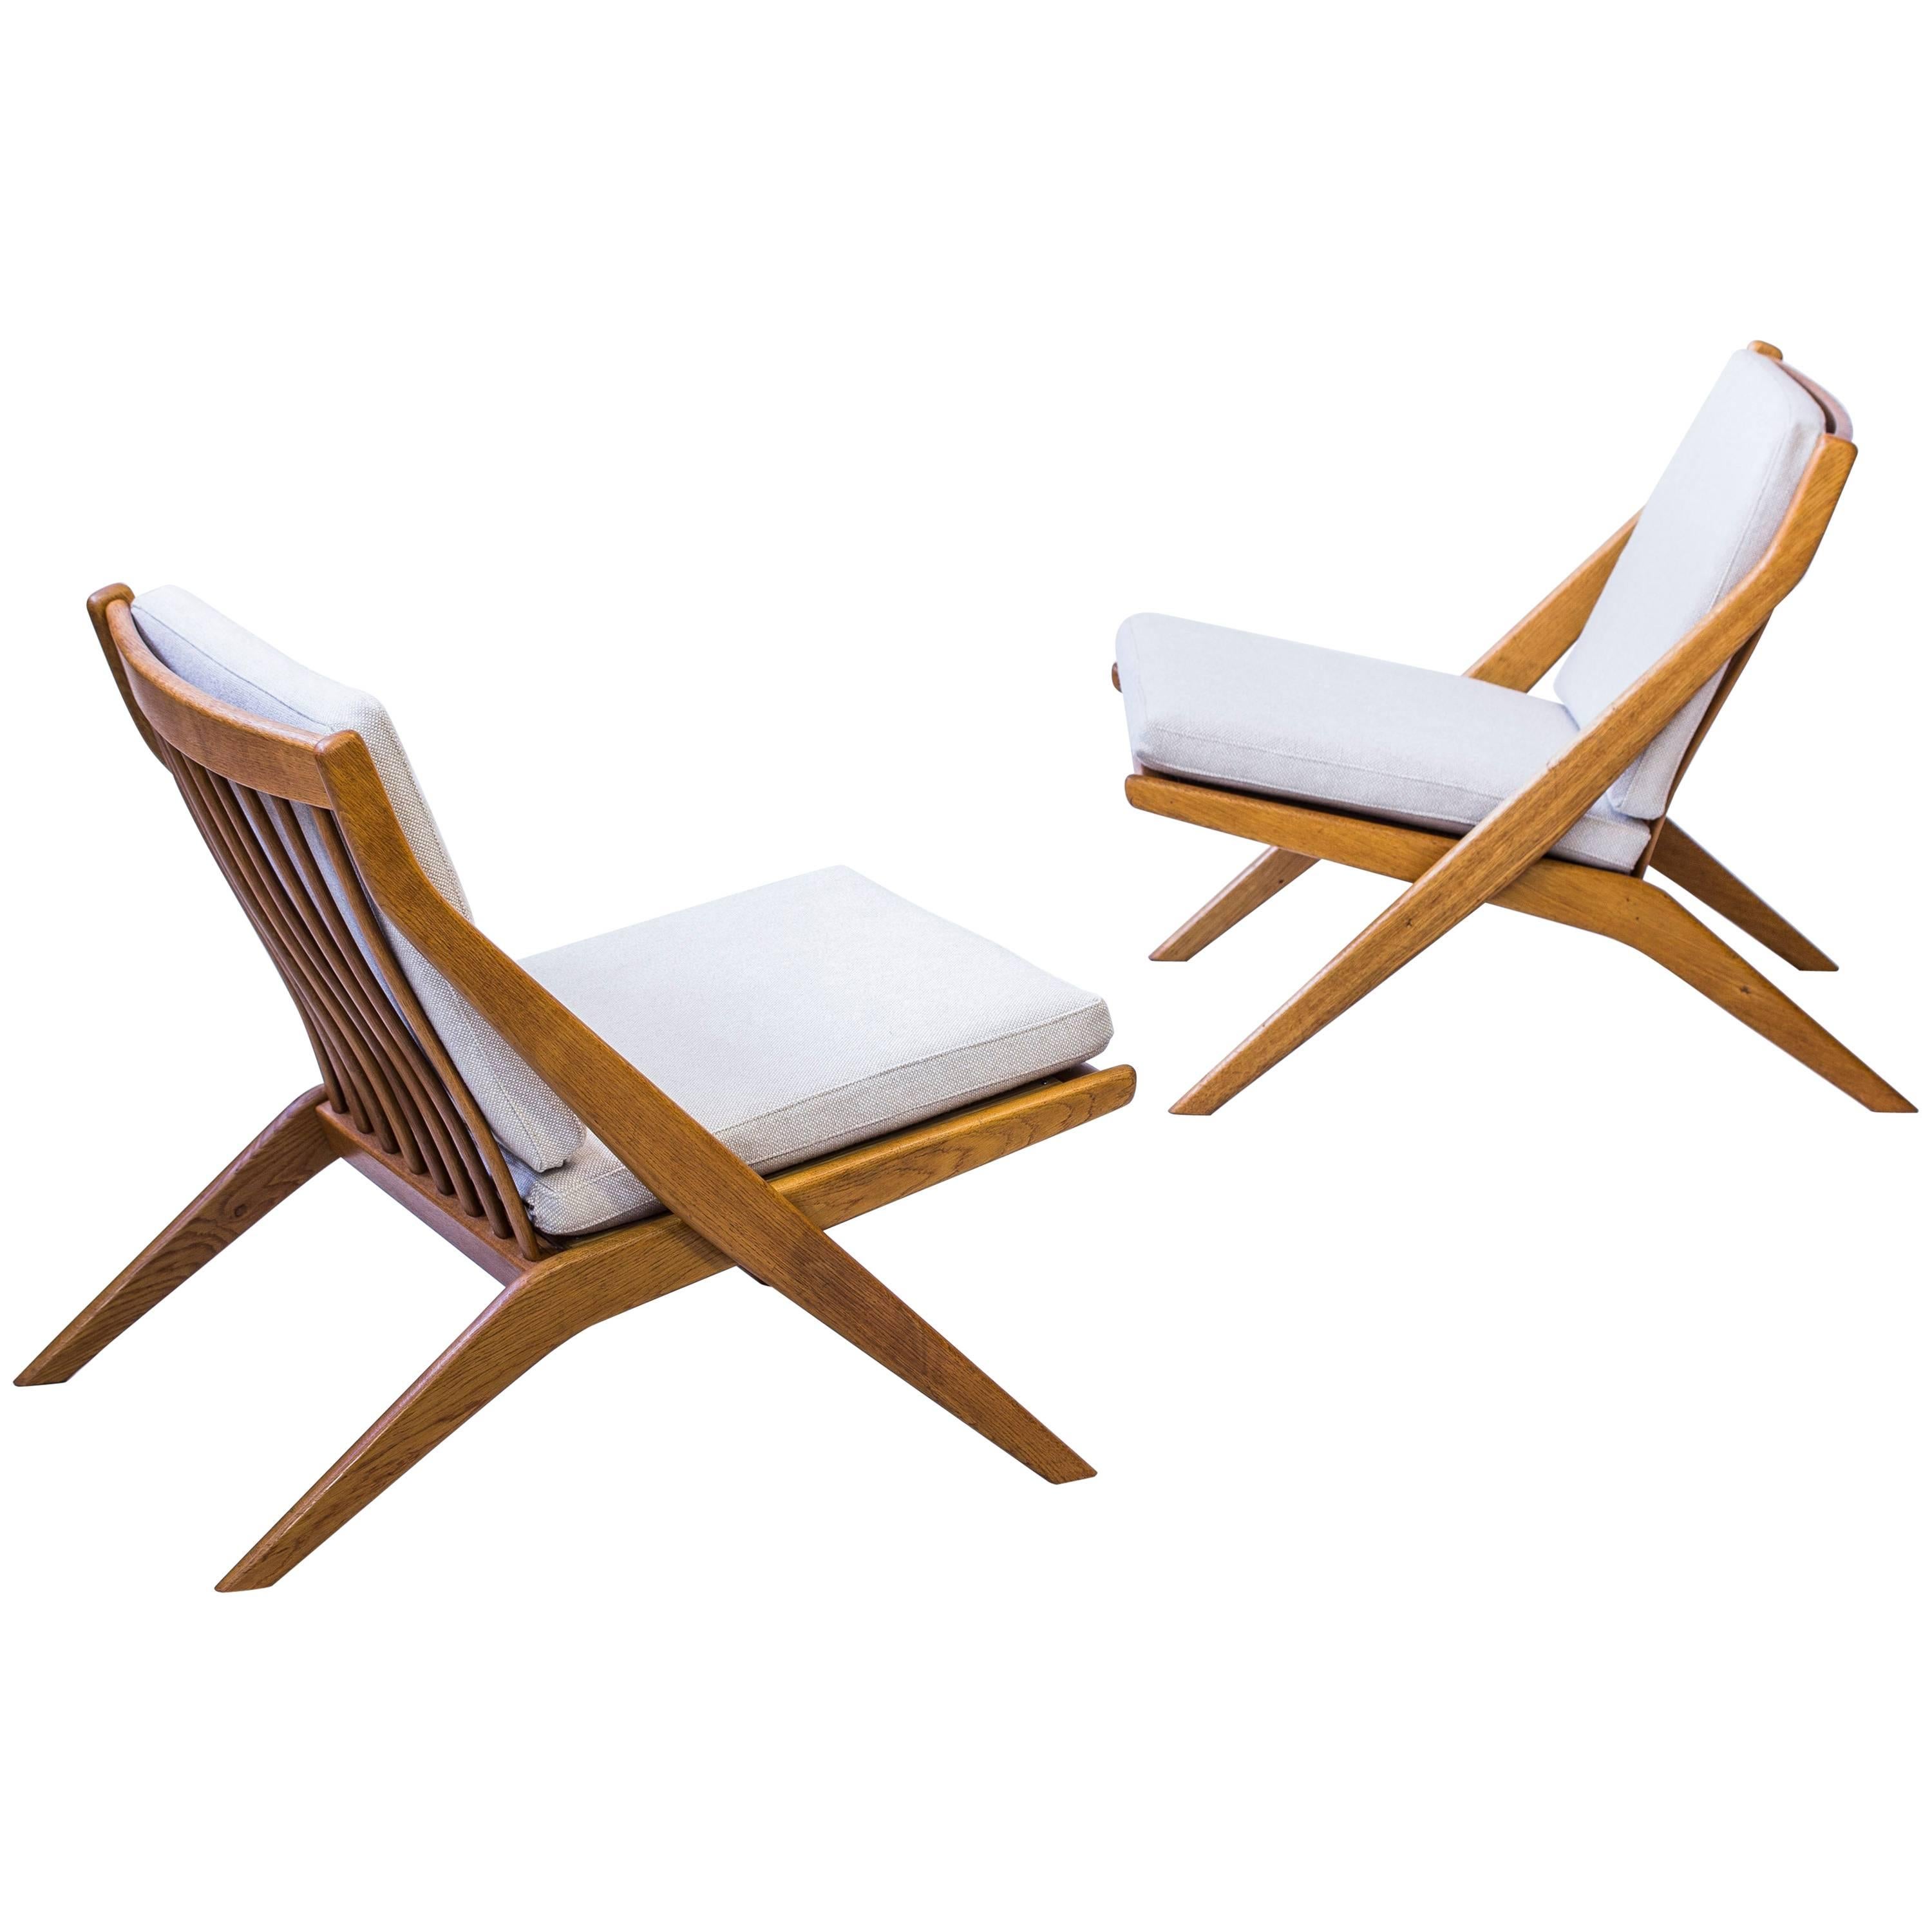 "Scissor" Lounge Chairs by Folke Ohlsson